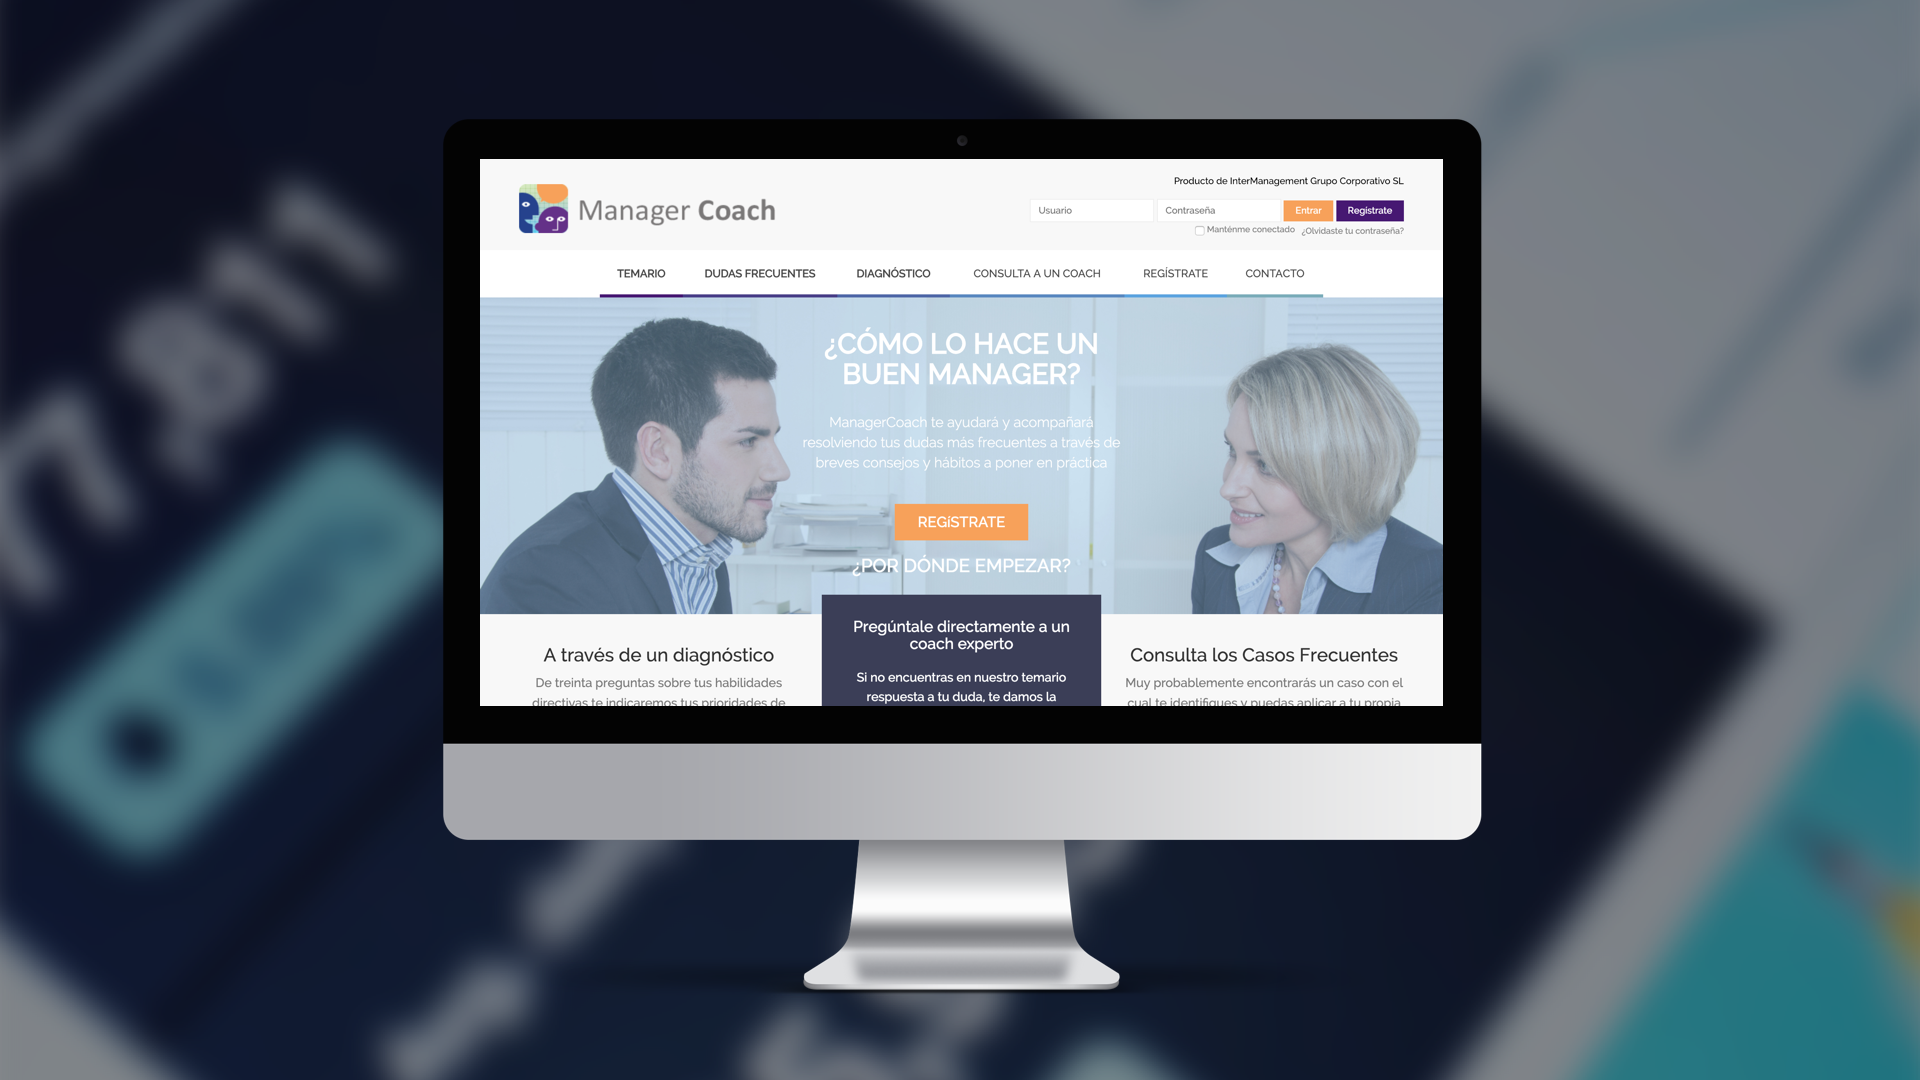 Home image of the Manager Coach software